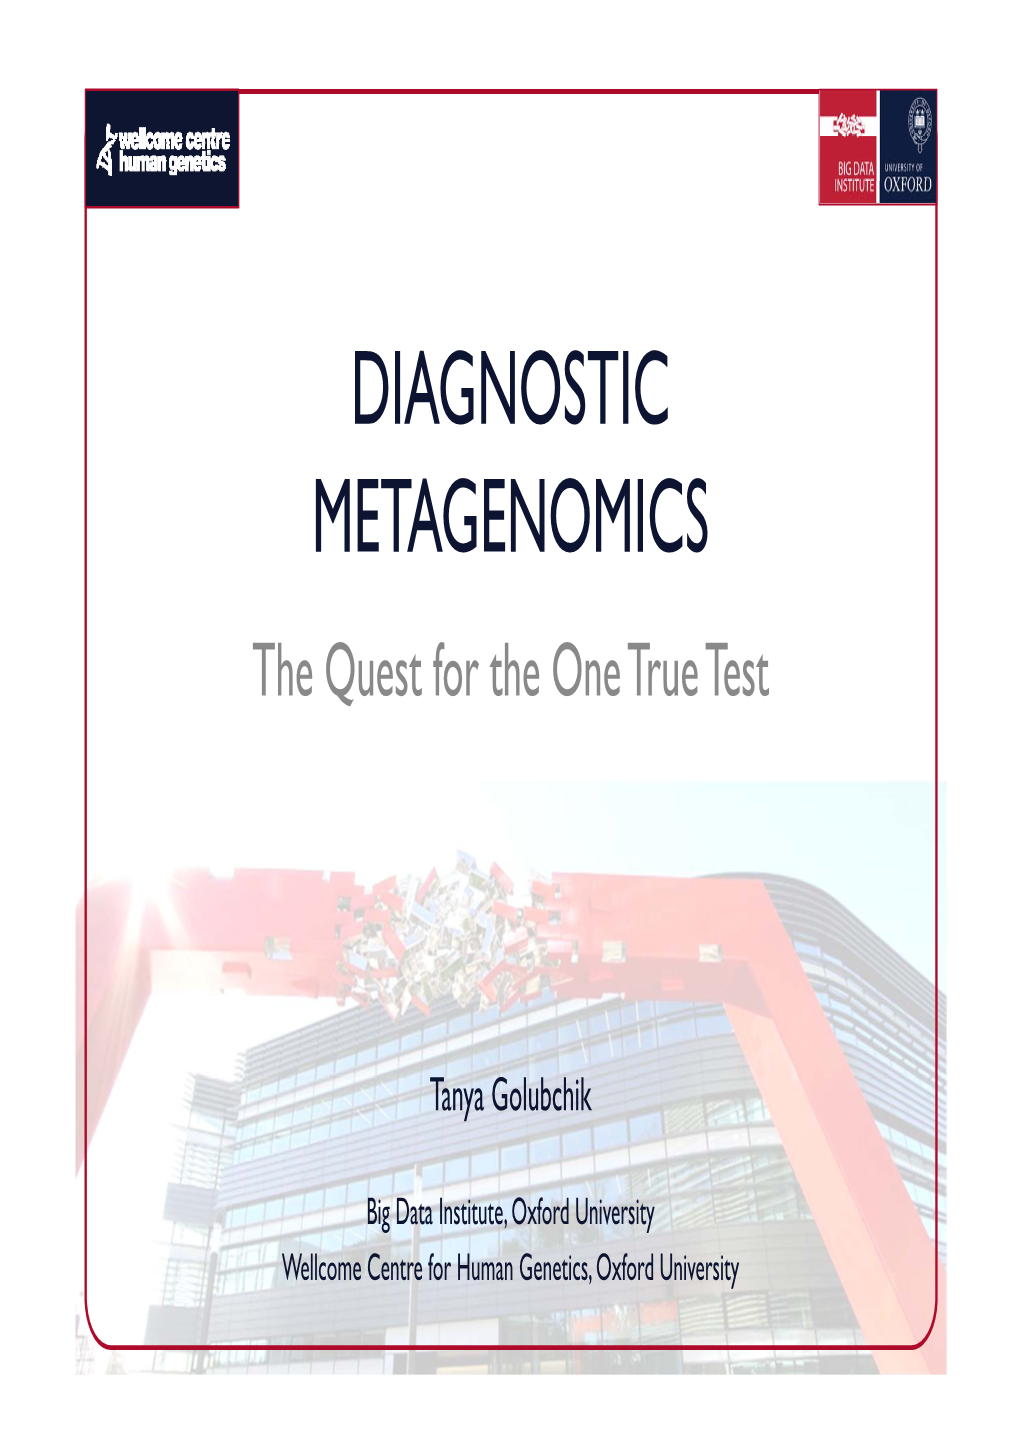 DIAGNOSTIC METAGENOMICS the Quest for the One True Test